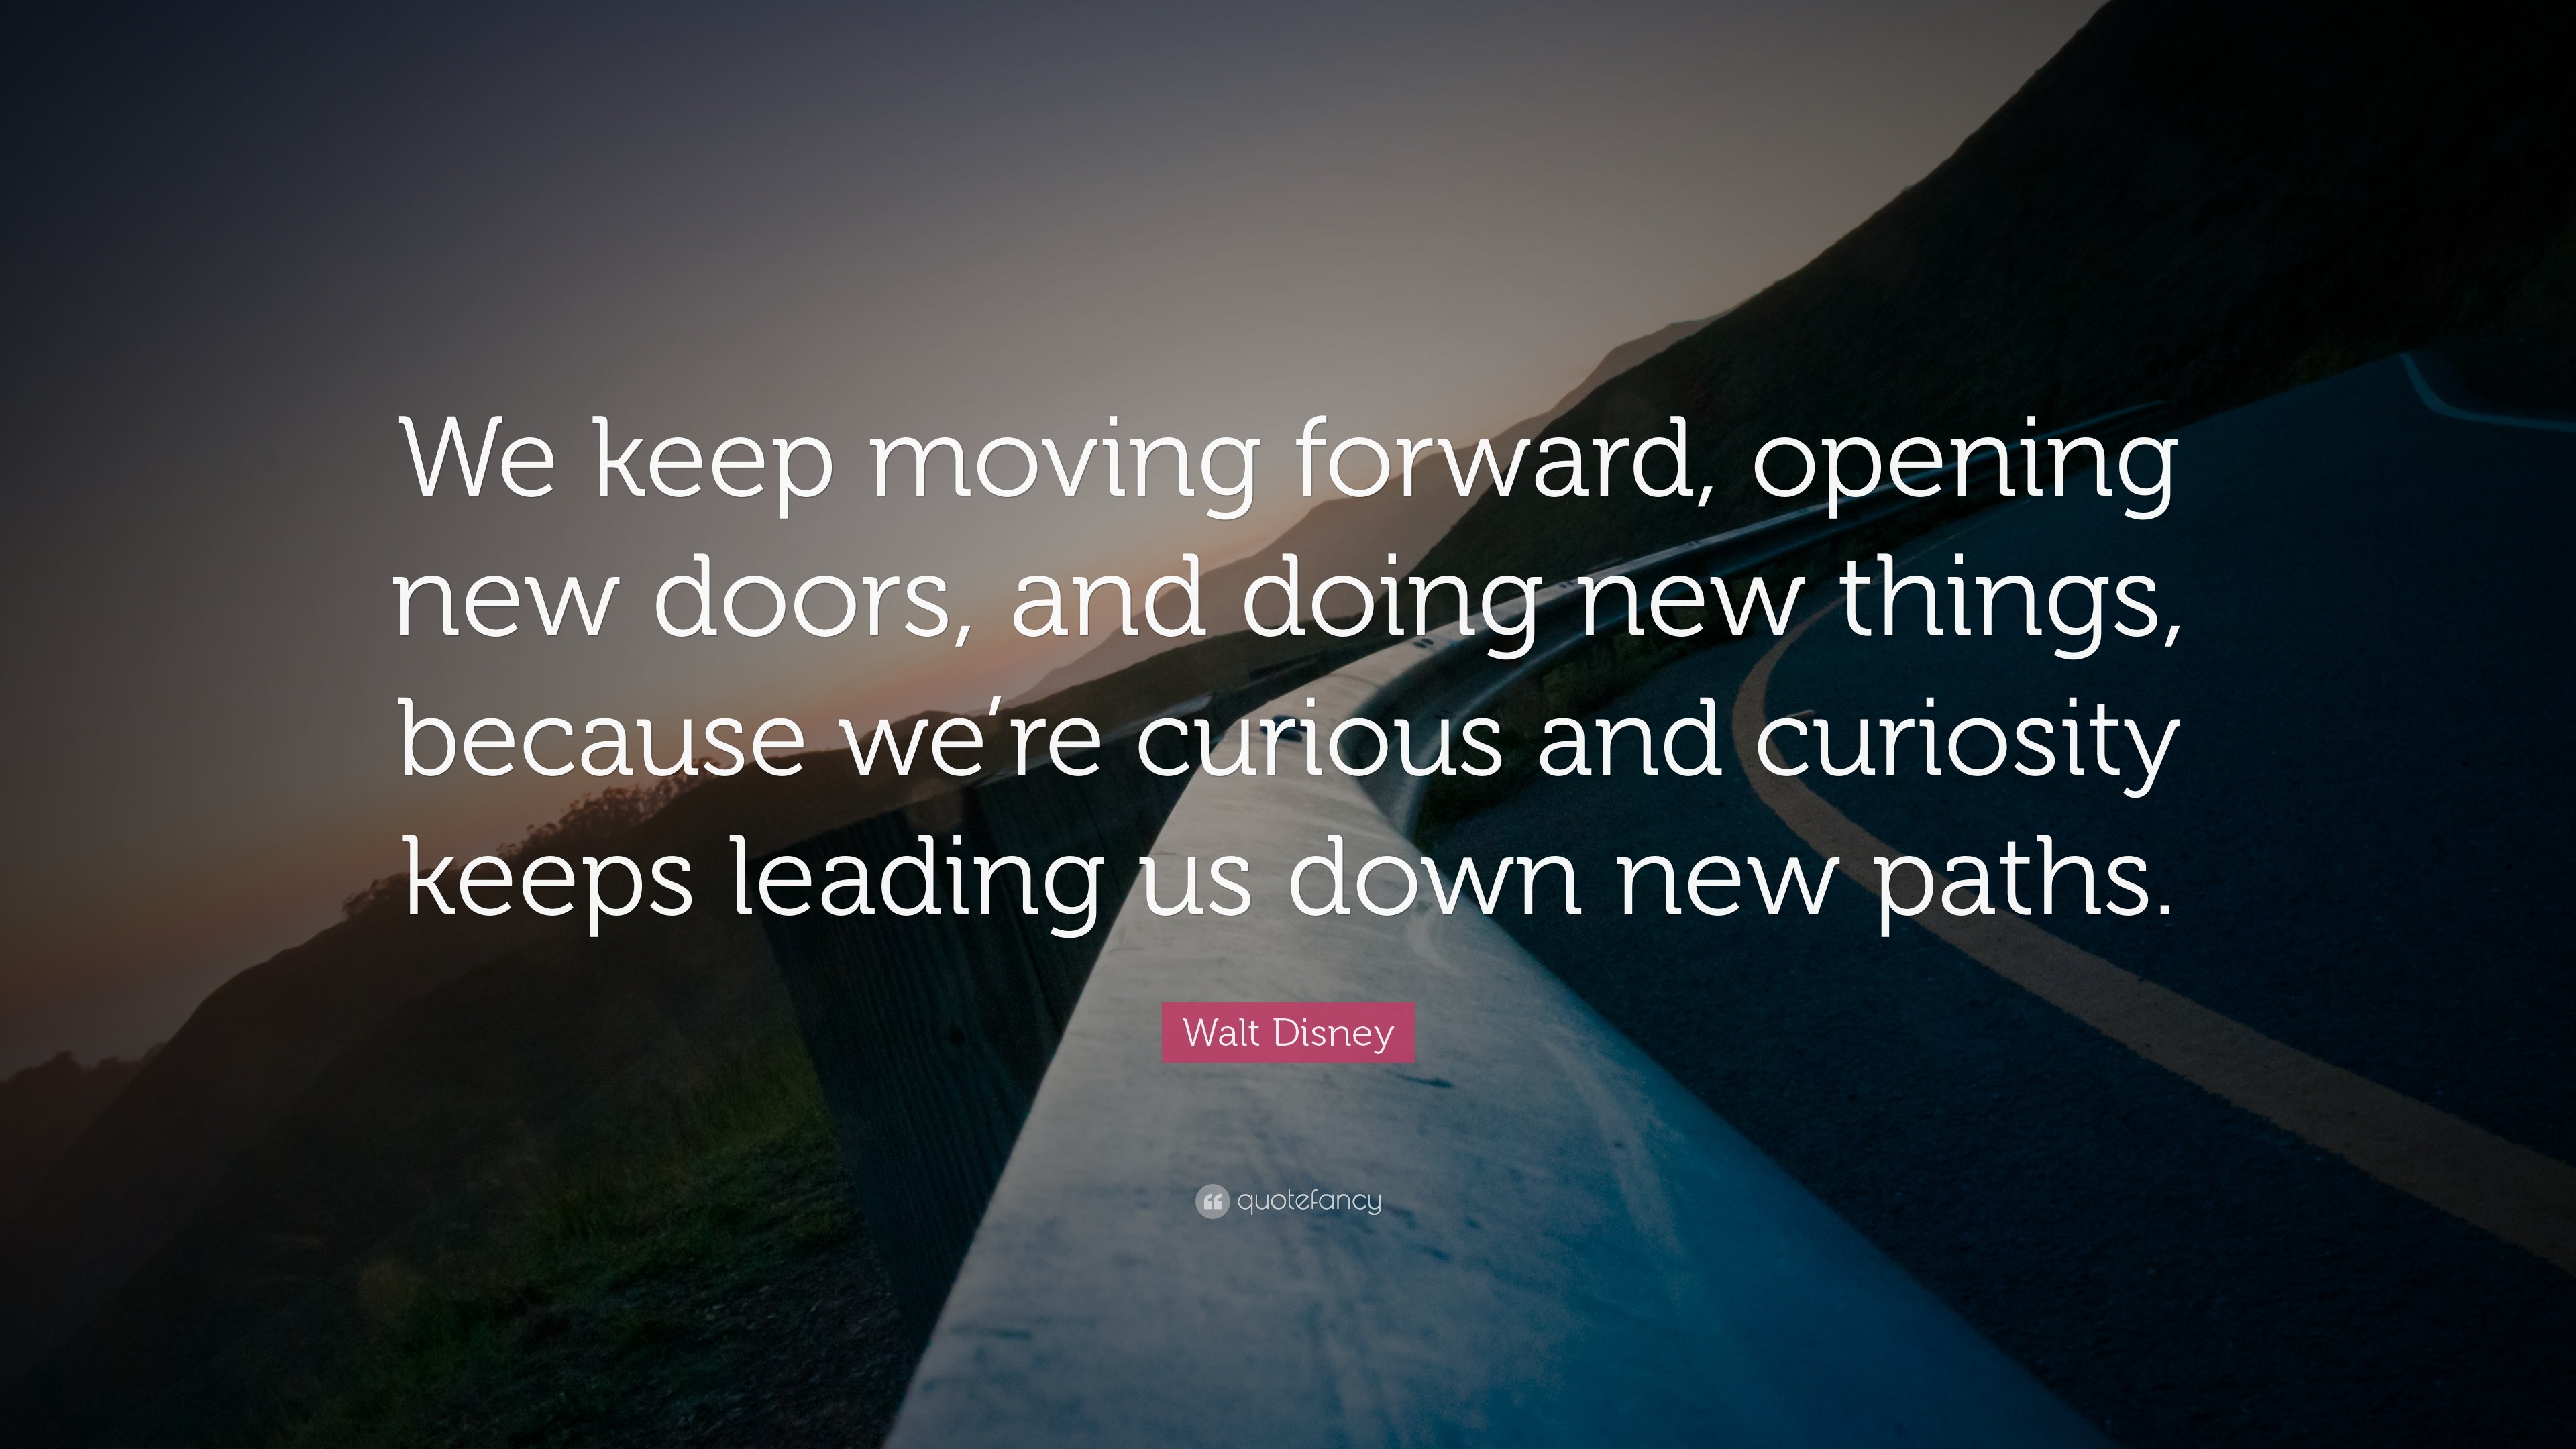 3840x2160 Walt Disney Quote: “We keep moving forward, opening new doors, and doing